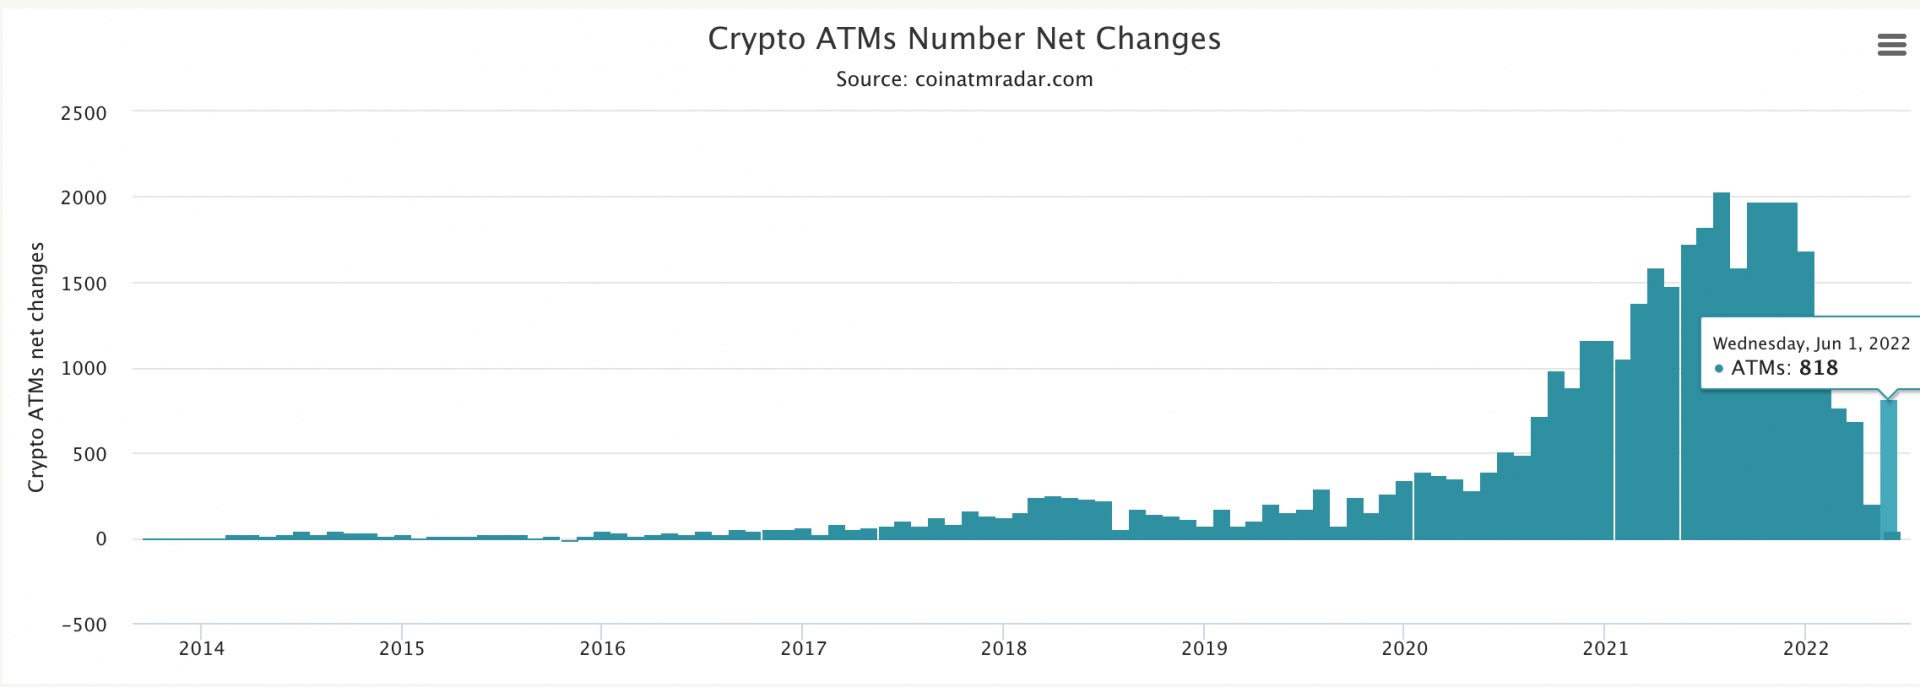 Bitcoin ATMs are experiencing bearish growth.